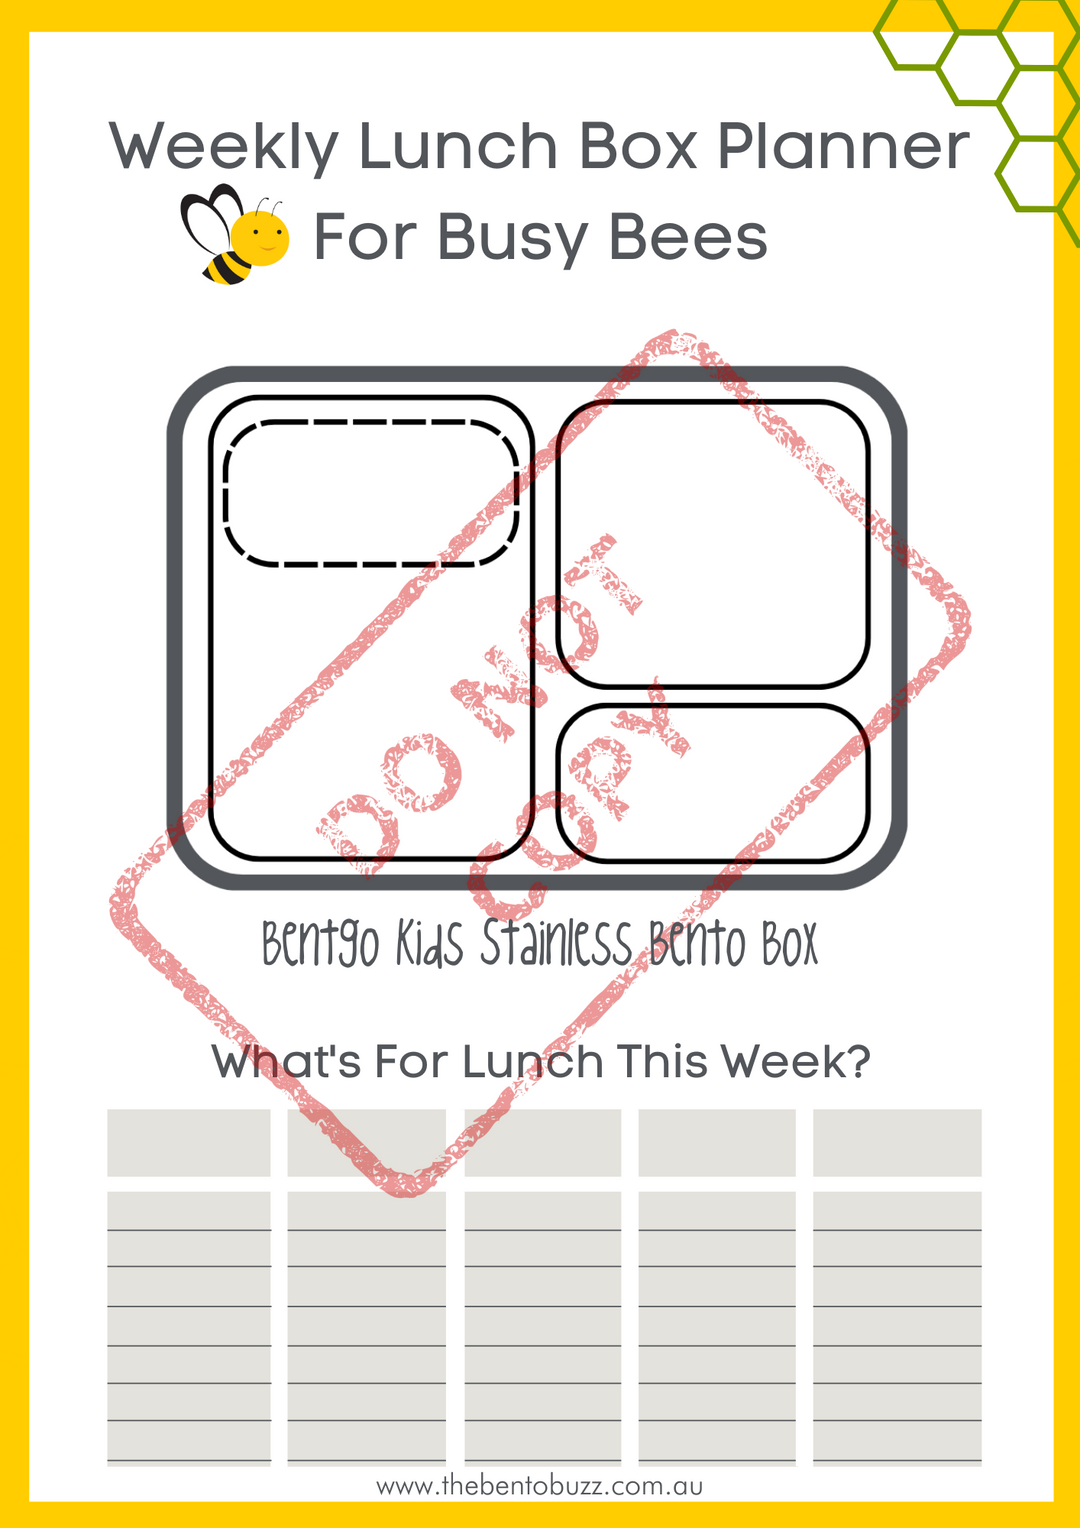 Download & Print Lunch Box Planner - Bentgo Kids Stainless